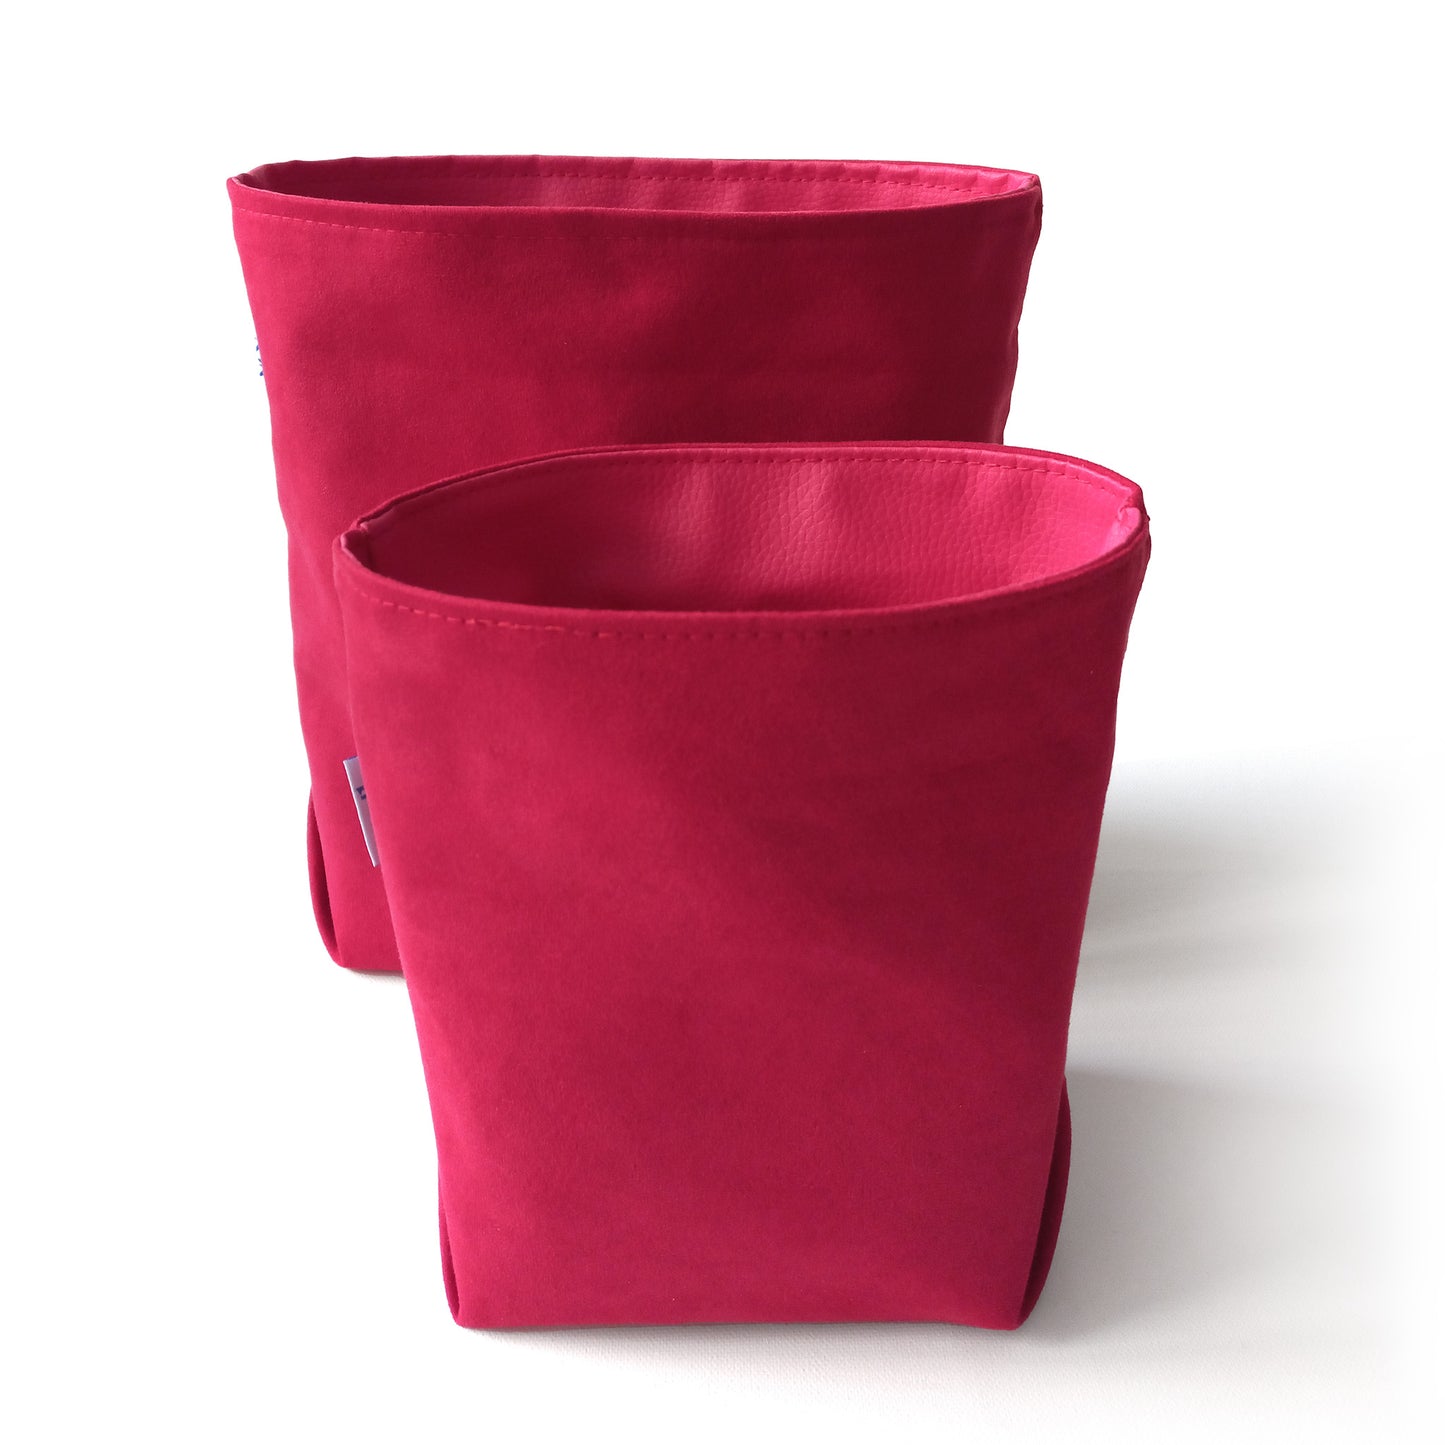 Two red fabric storage baskets